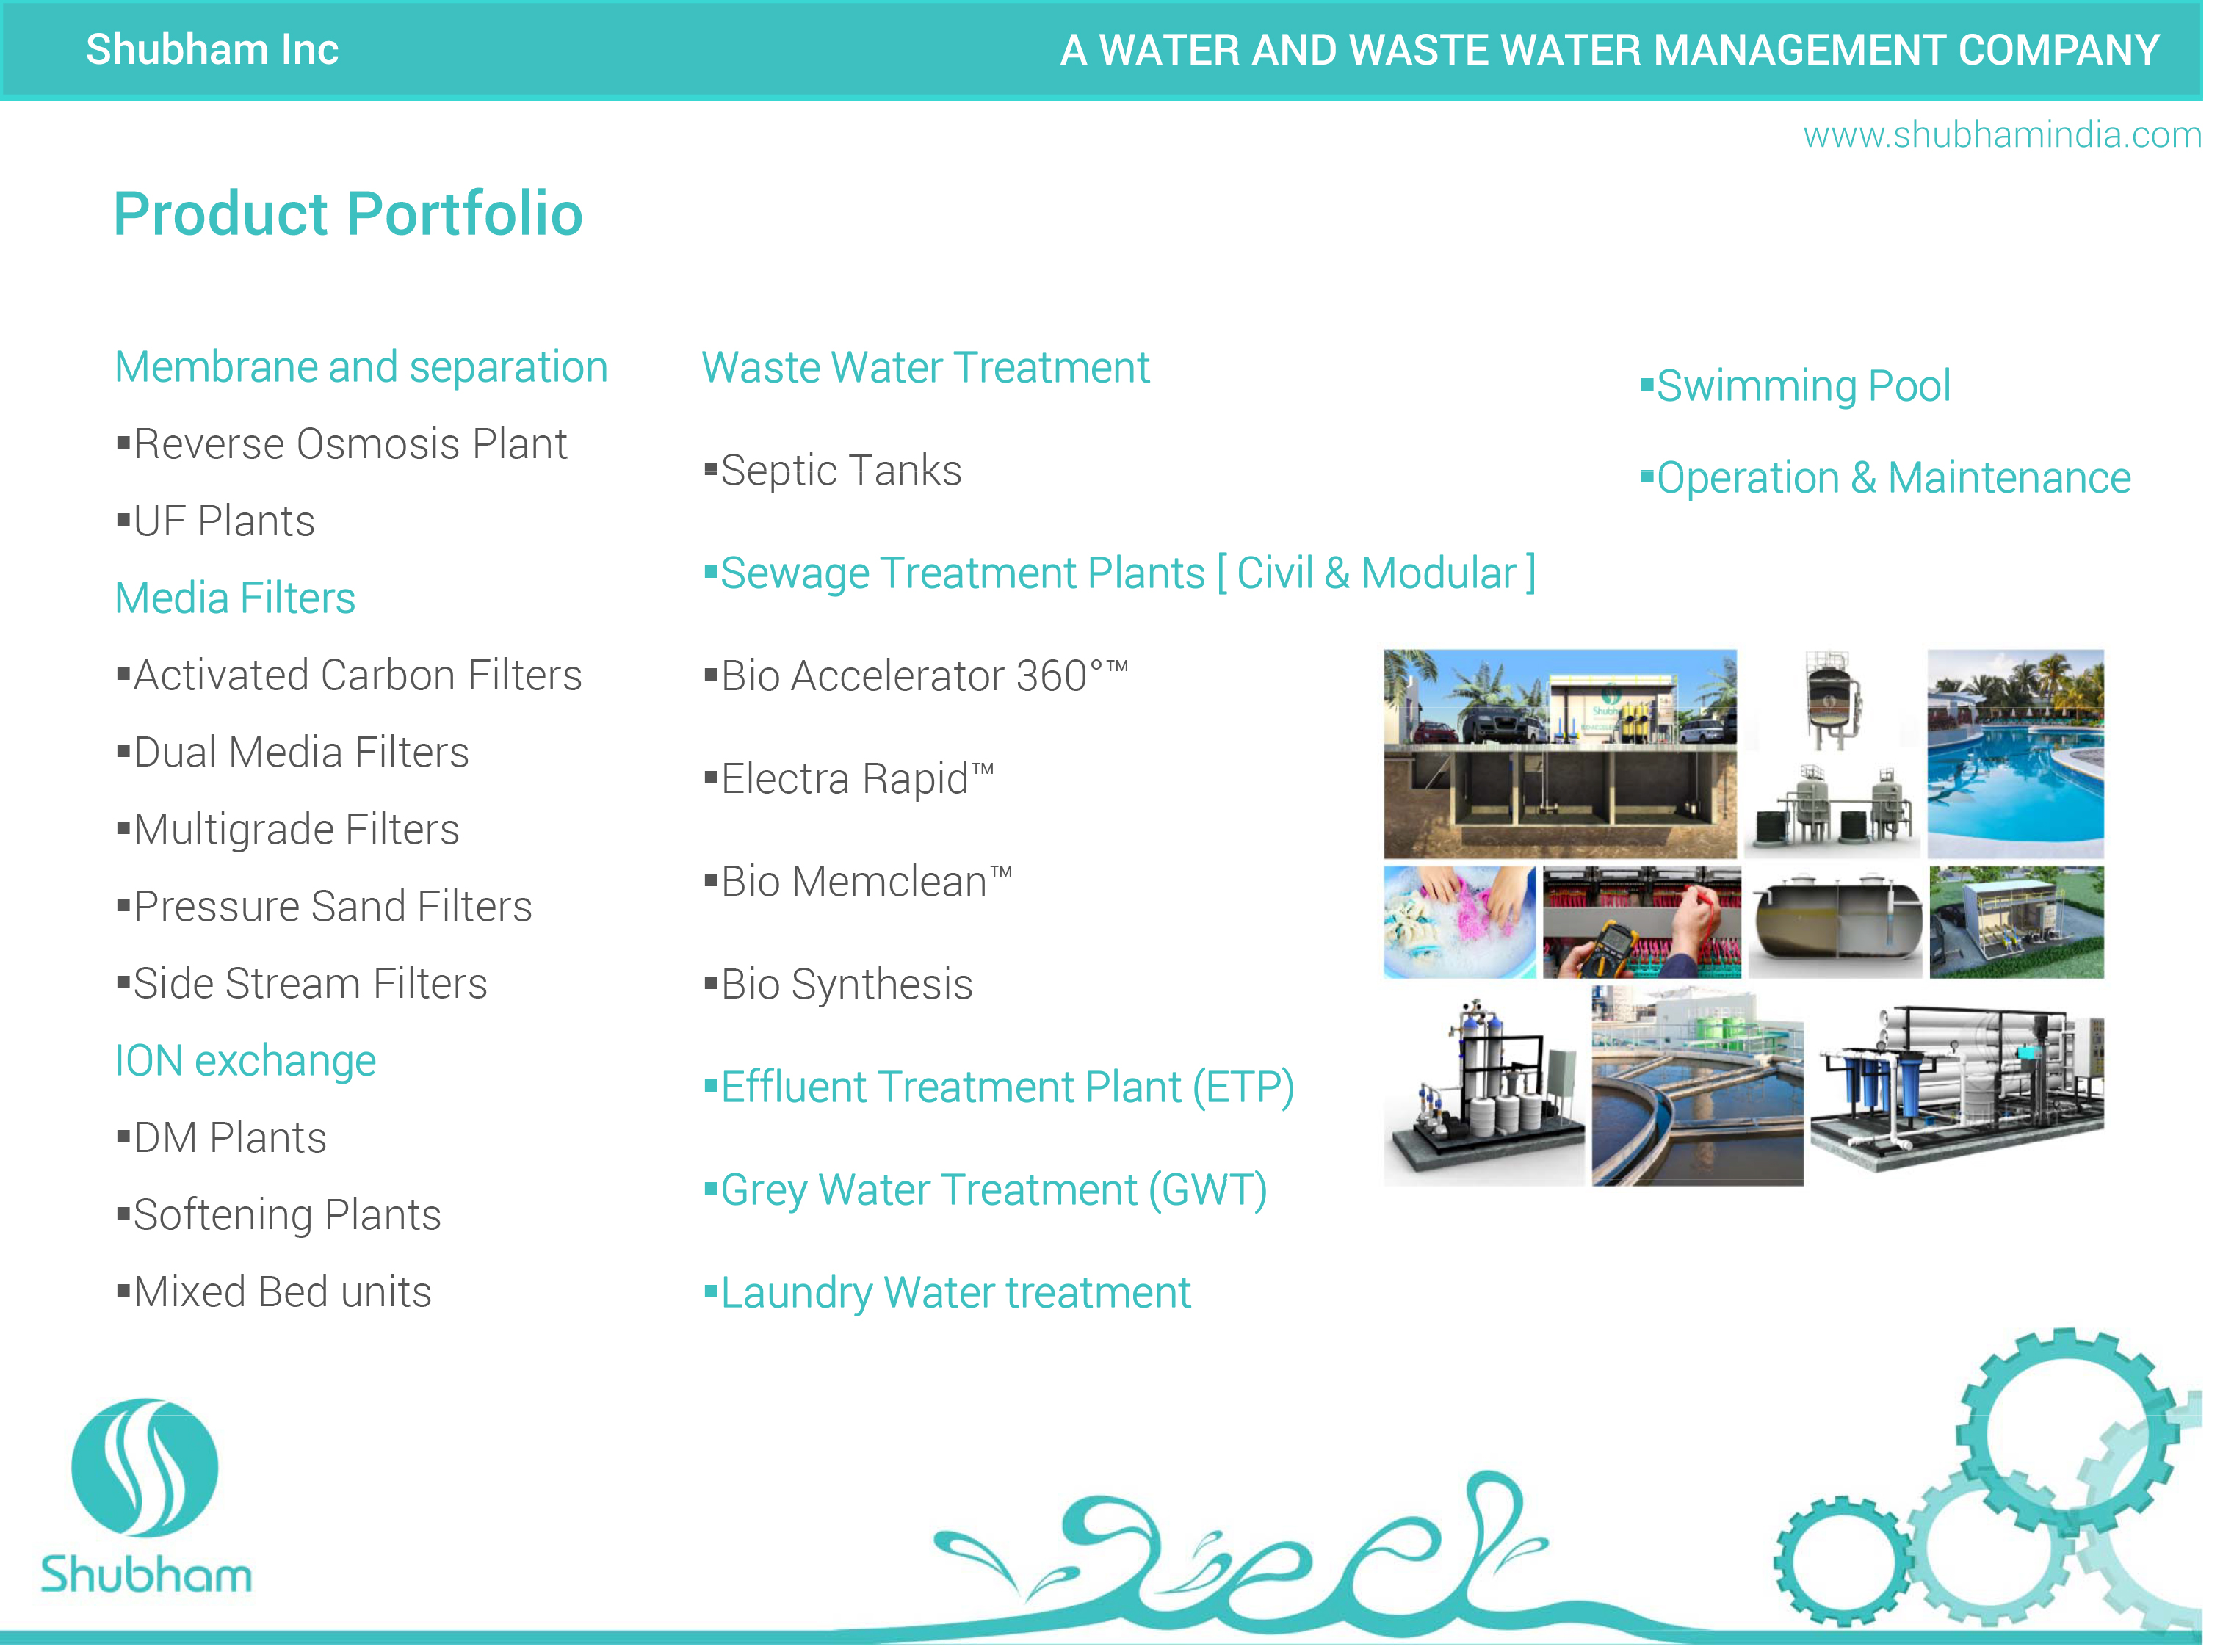 A Complete Waste Water Solution Through STP/ETP